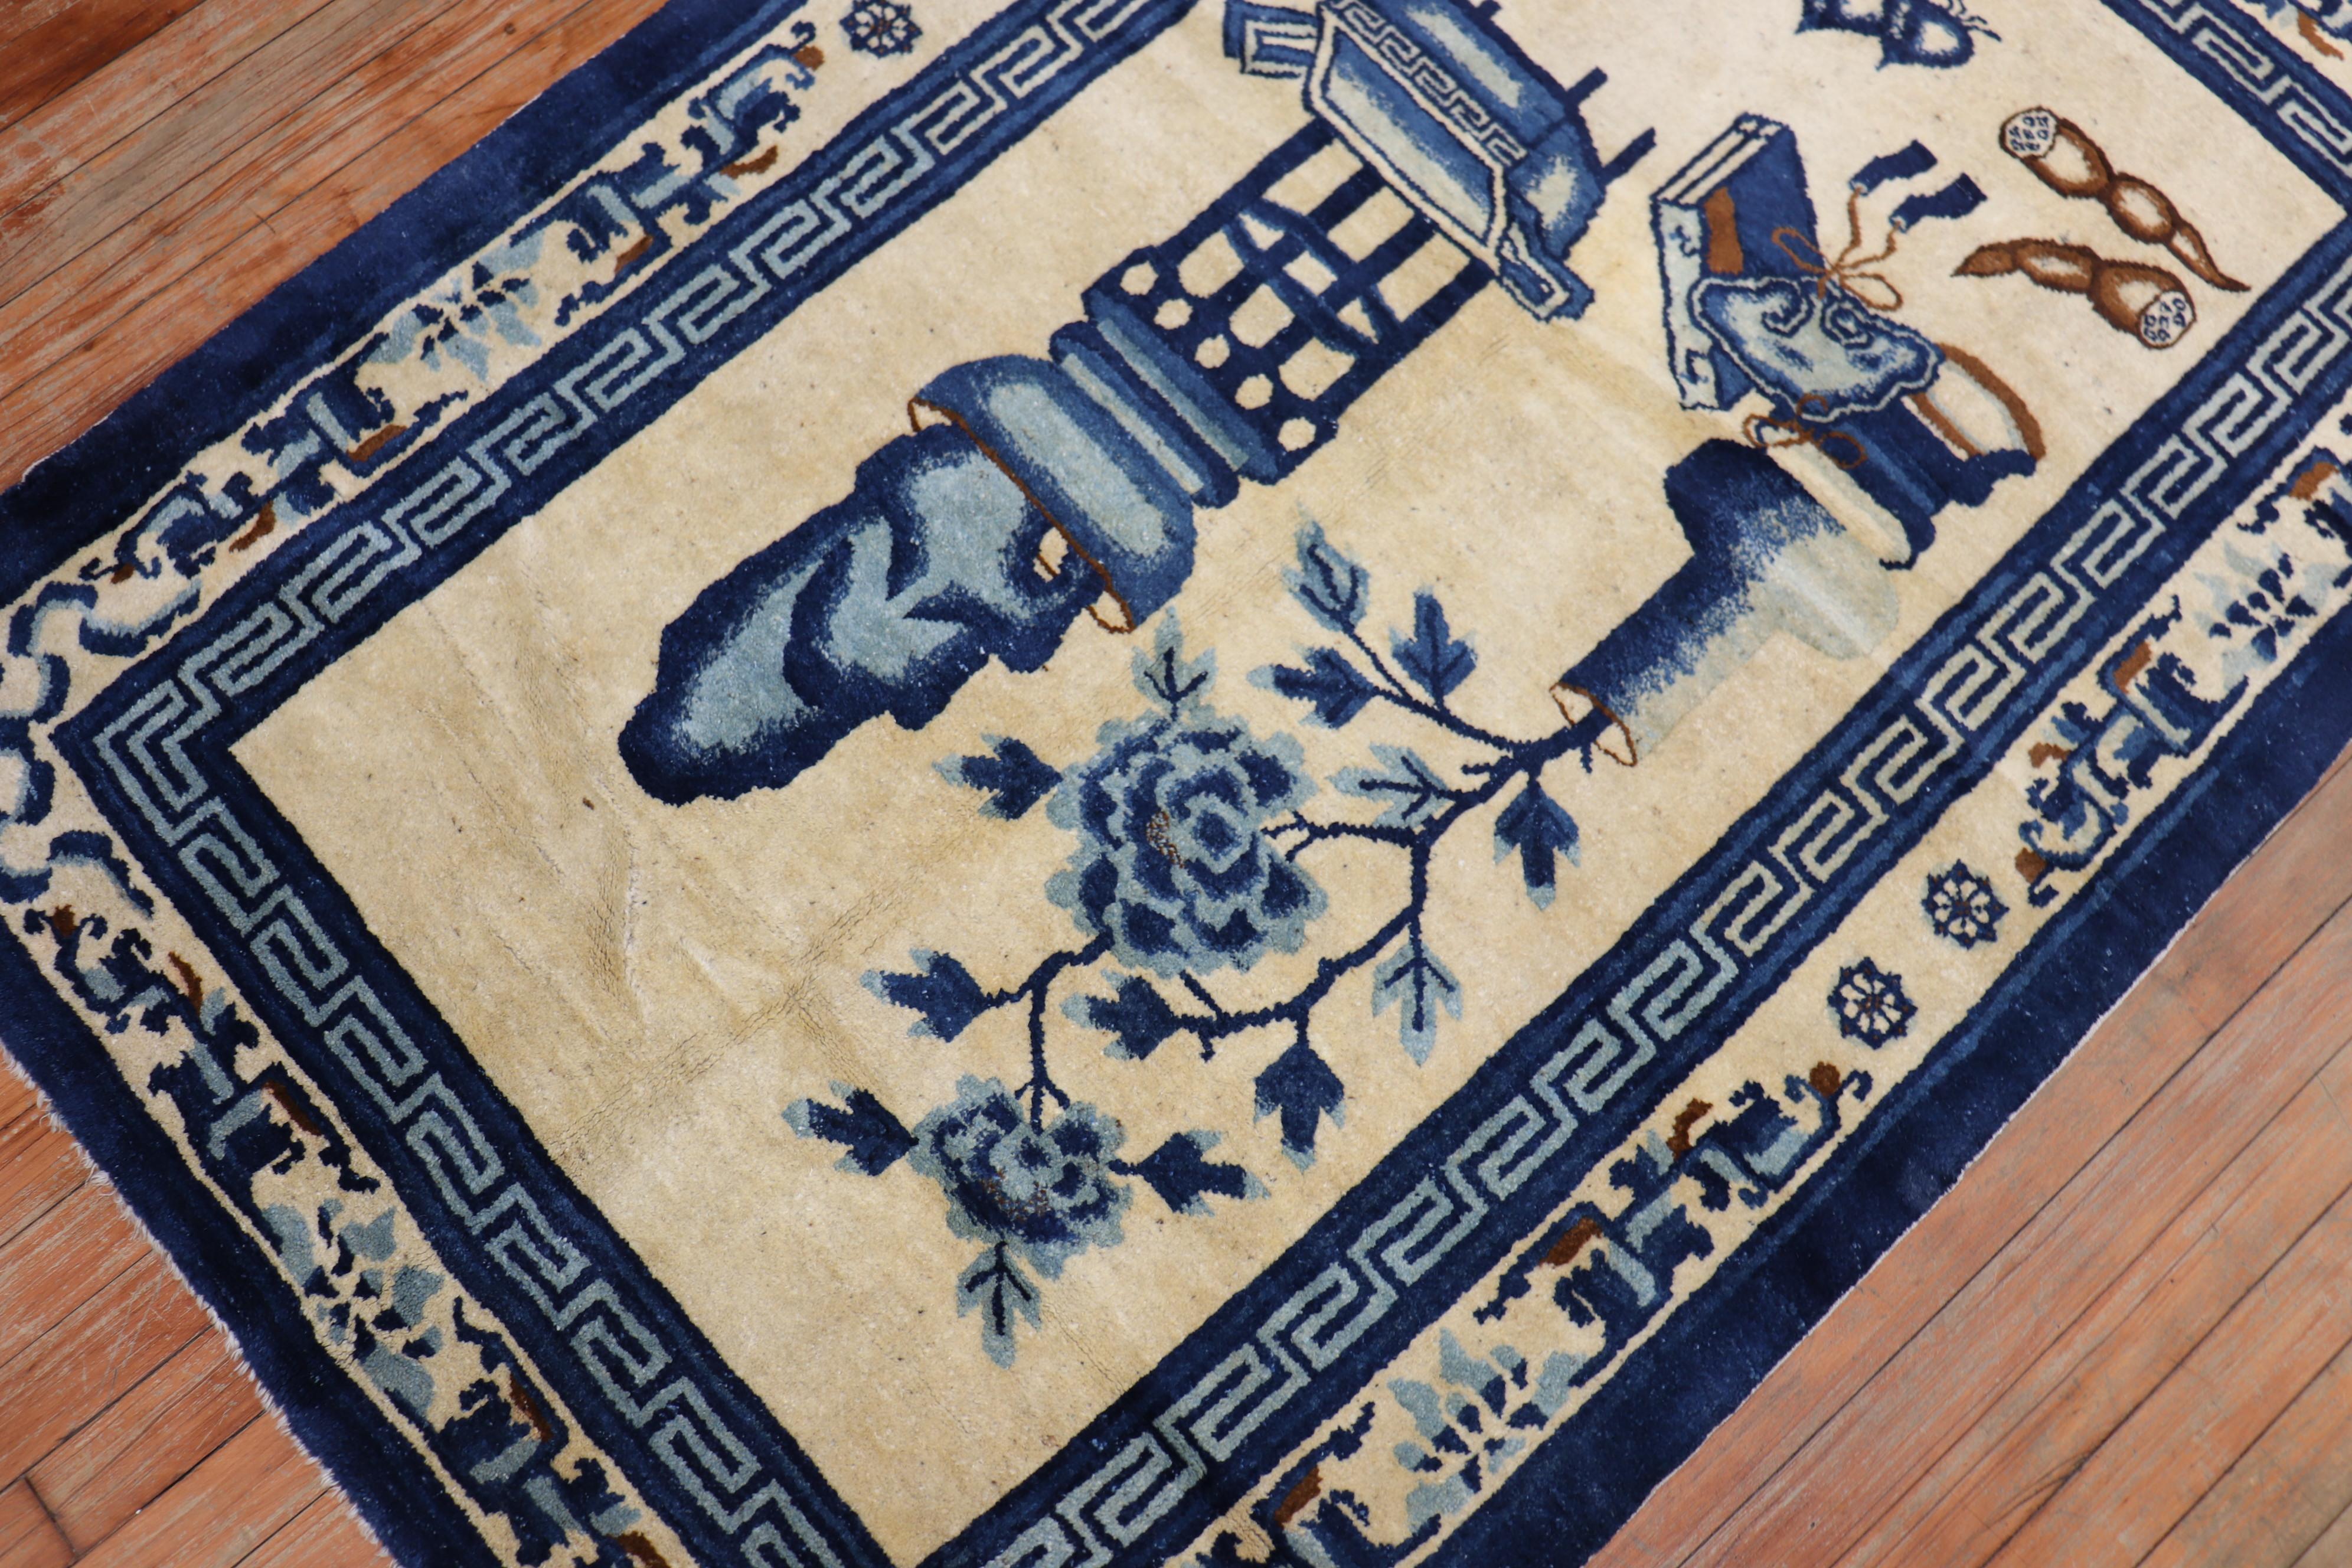 An early 20th century Chinese Peking carpet in tan and blue colors featuring a whimsical motif. Even Full Pile Condition

circa 1920, measures: 3'8'' x 5'7